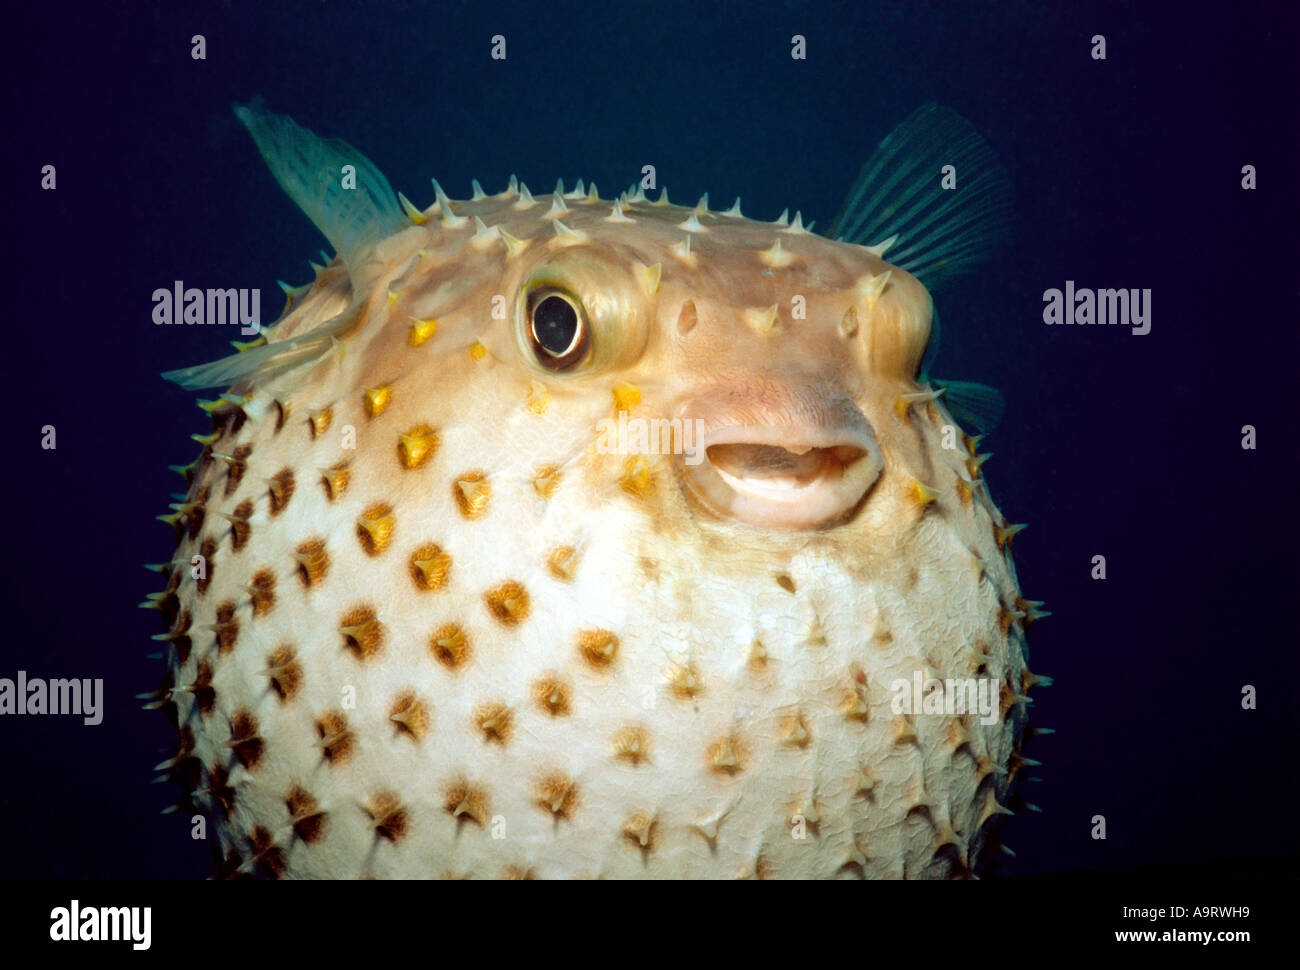 Close up image of a Yellowspotted Burrfish (Chilomycterus spilostylus)  puffed up against a dark blue background Stock Photo - Alamy